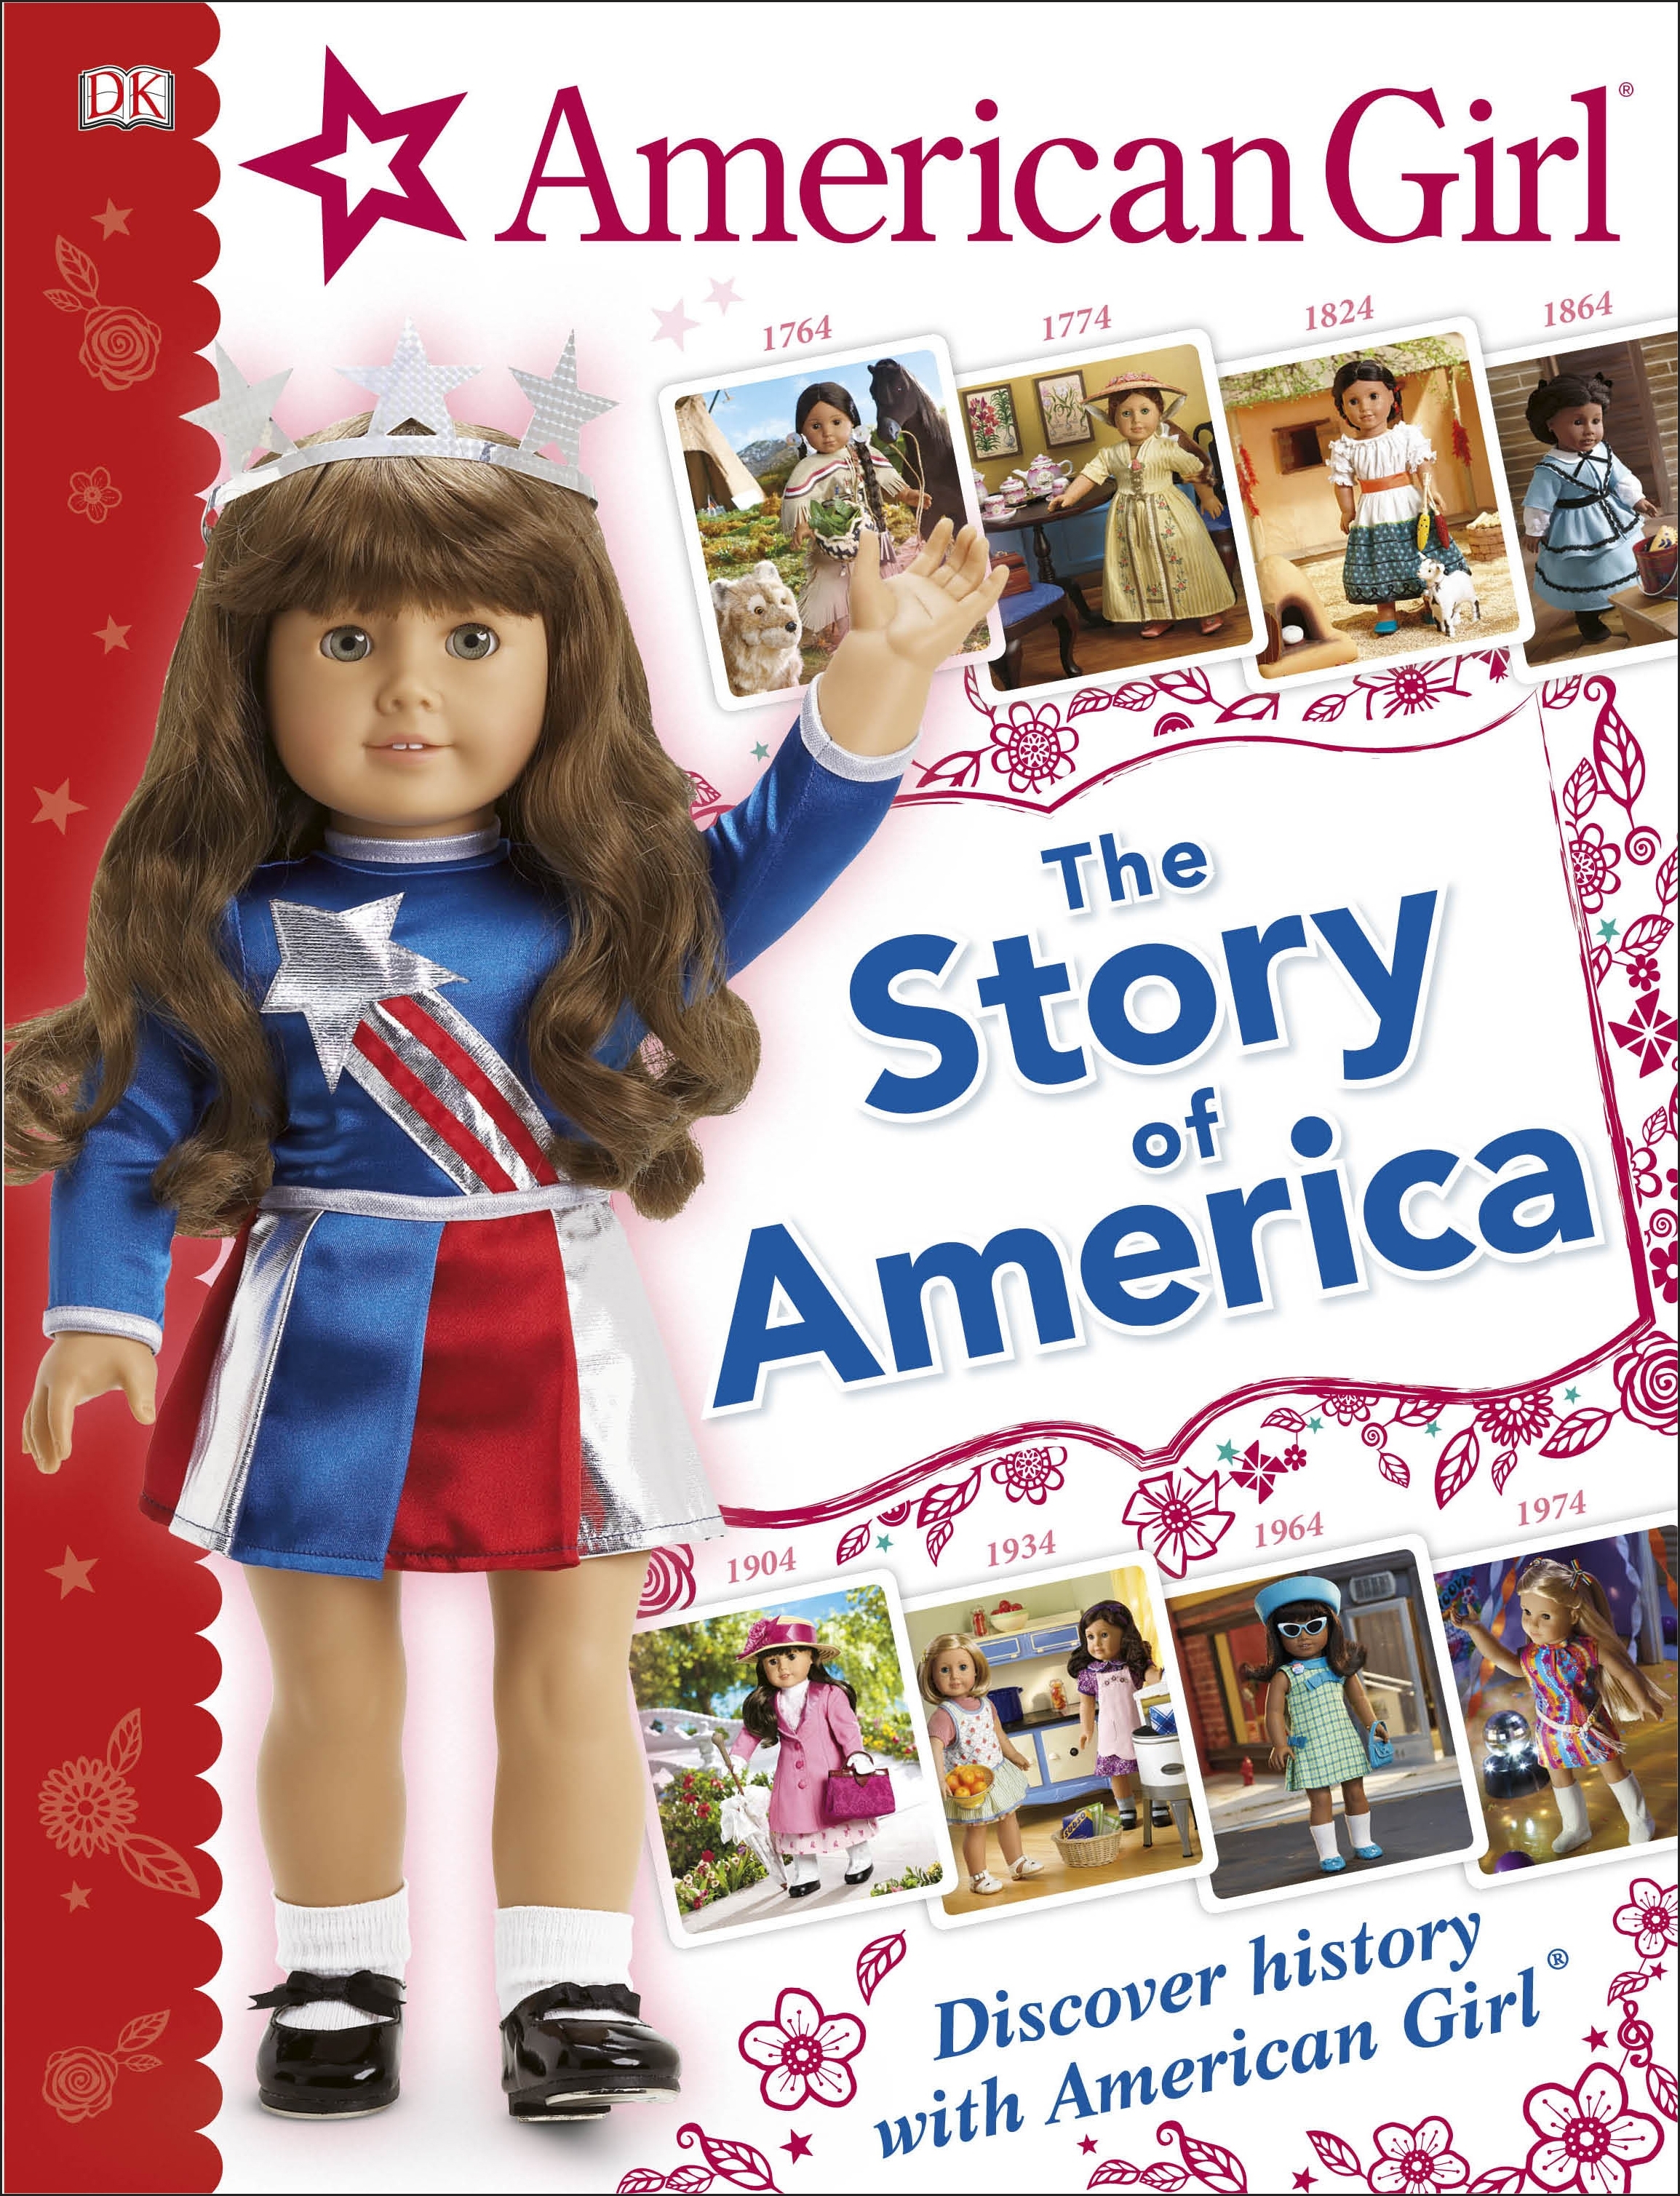 American Girl: The Story of America